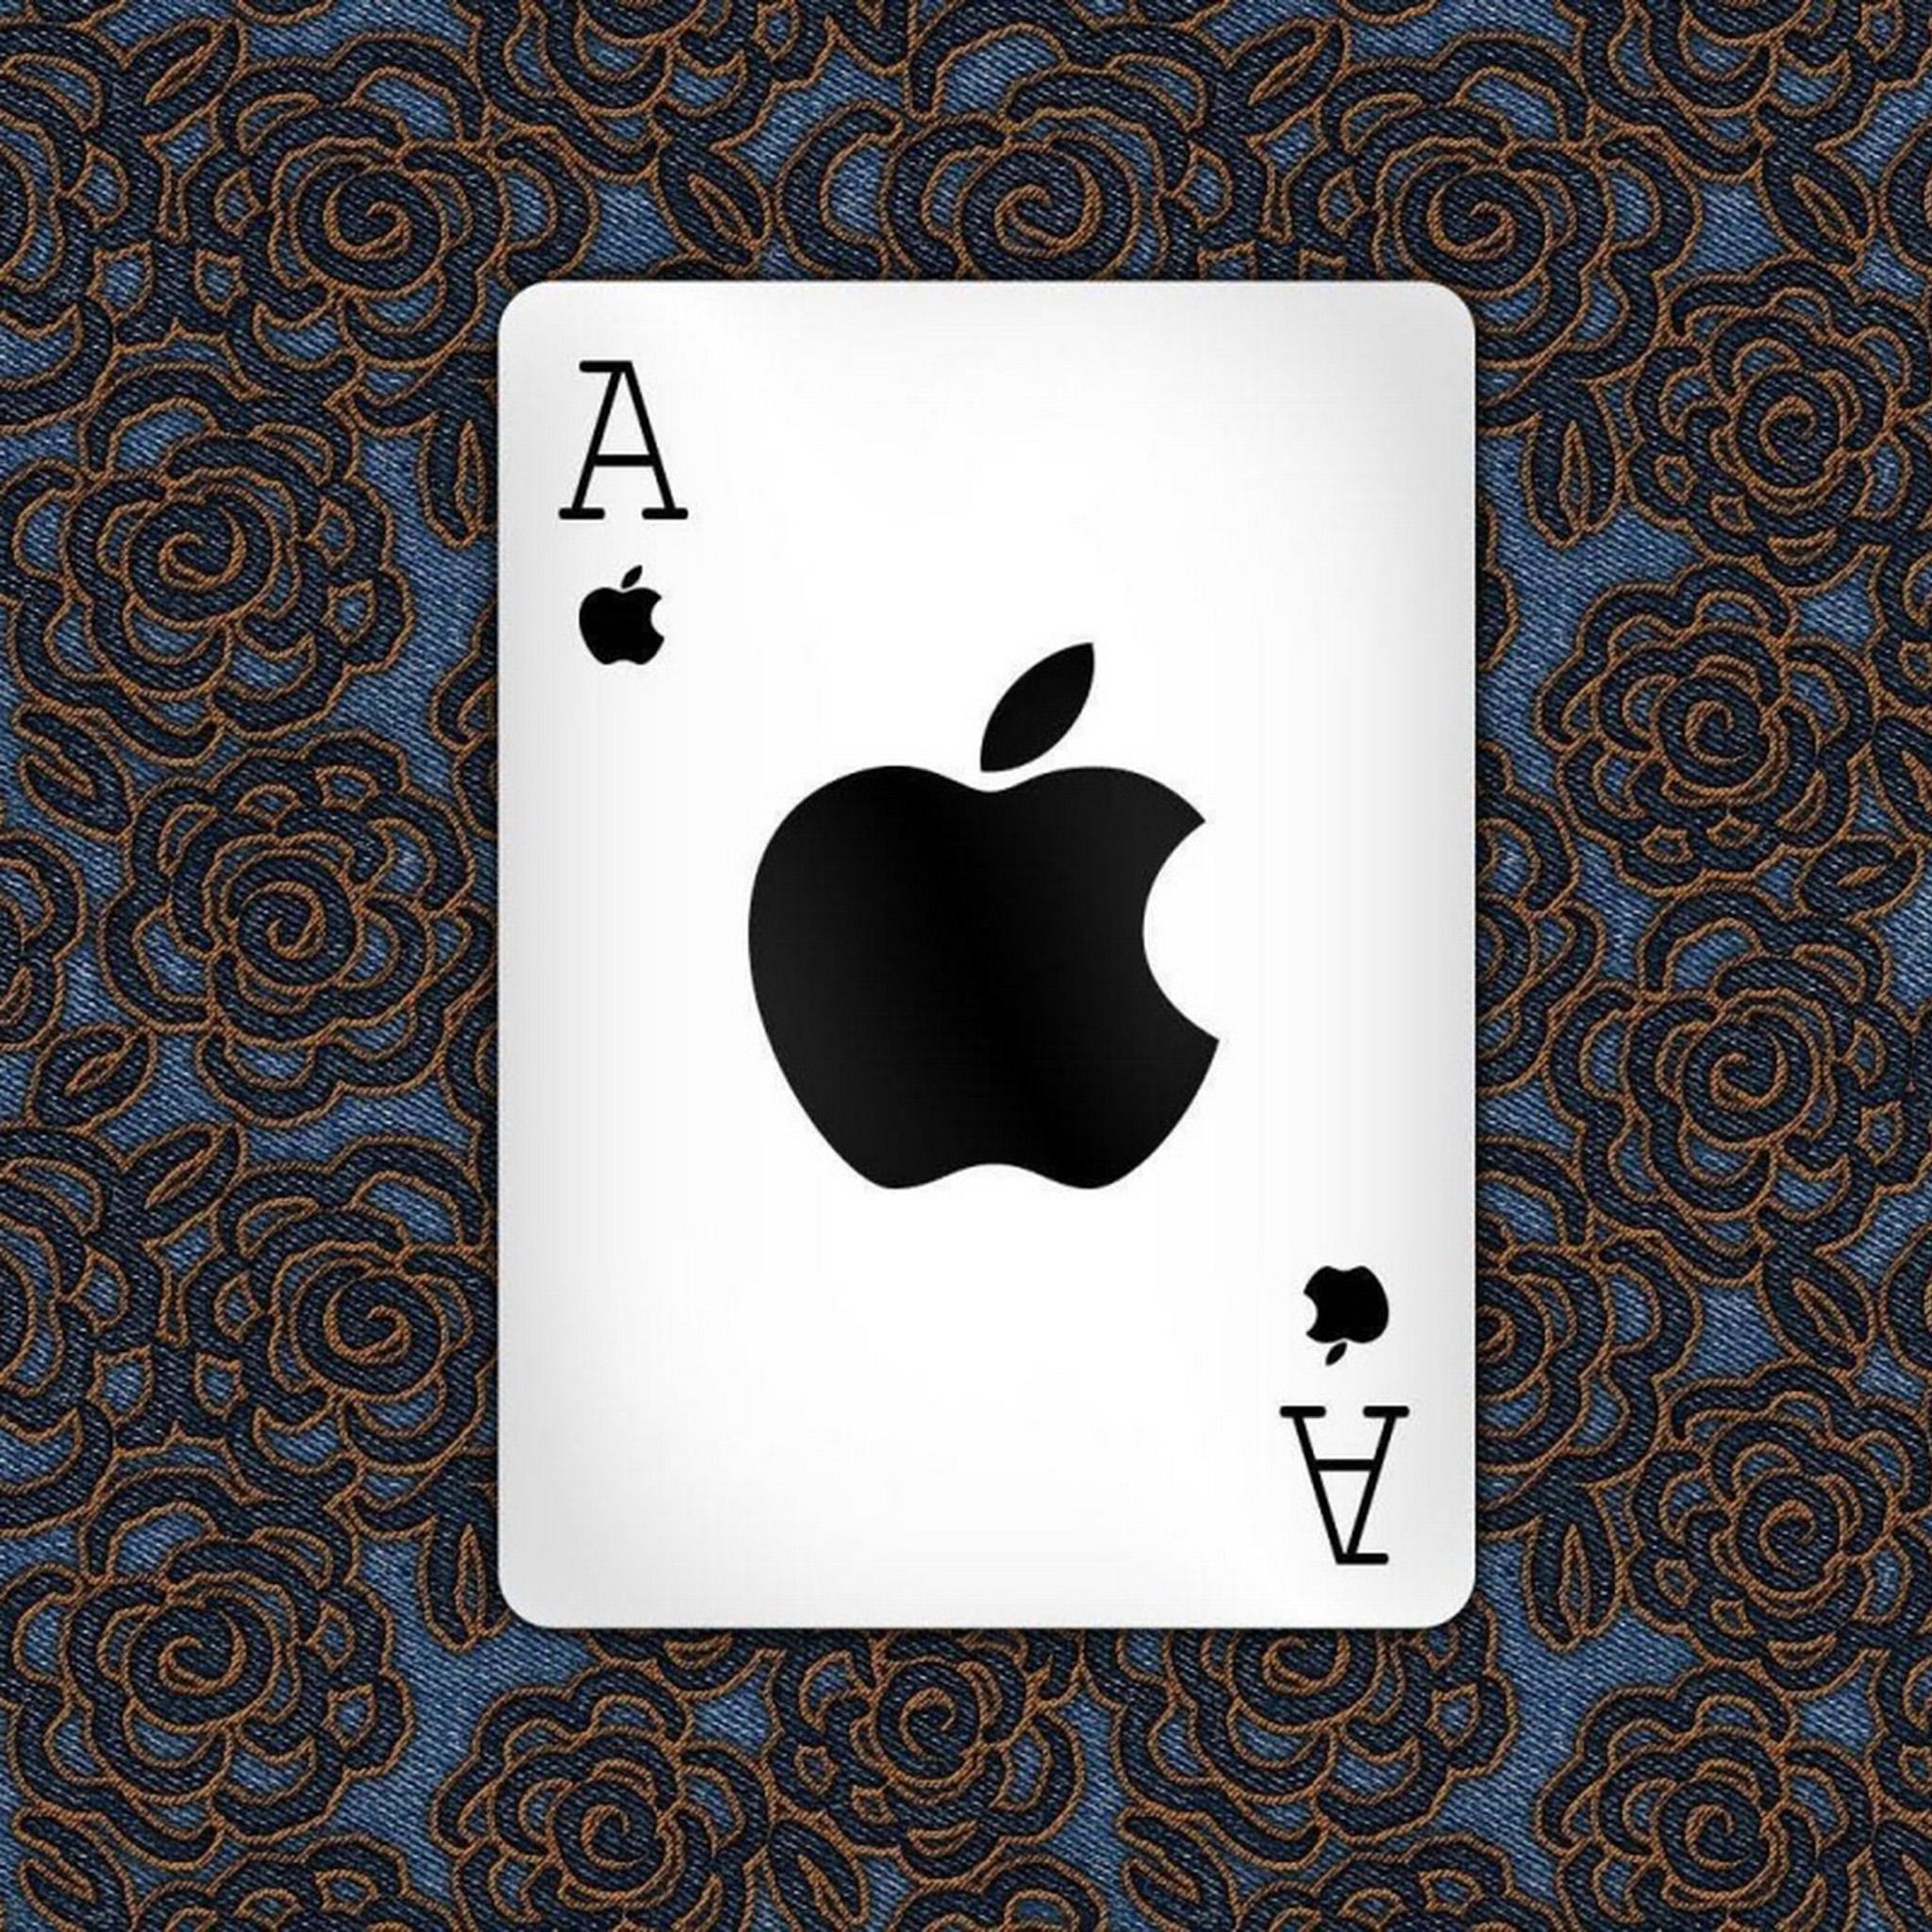 2048x2048 Poker Apple iPad Air Wallpapers, iPad Air Retina Wallpapers and Backgrounds